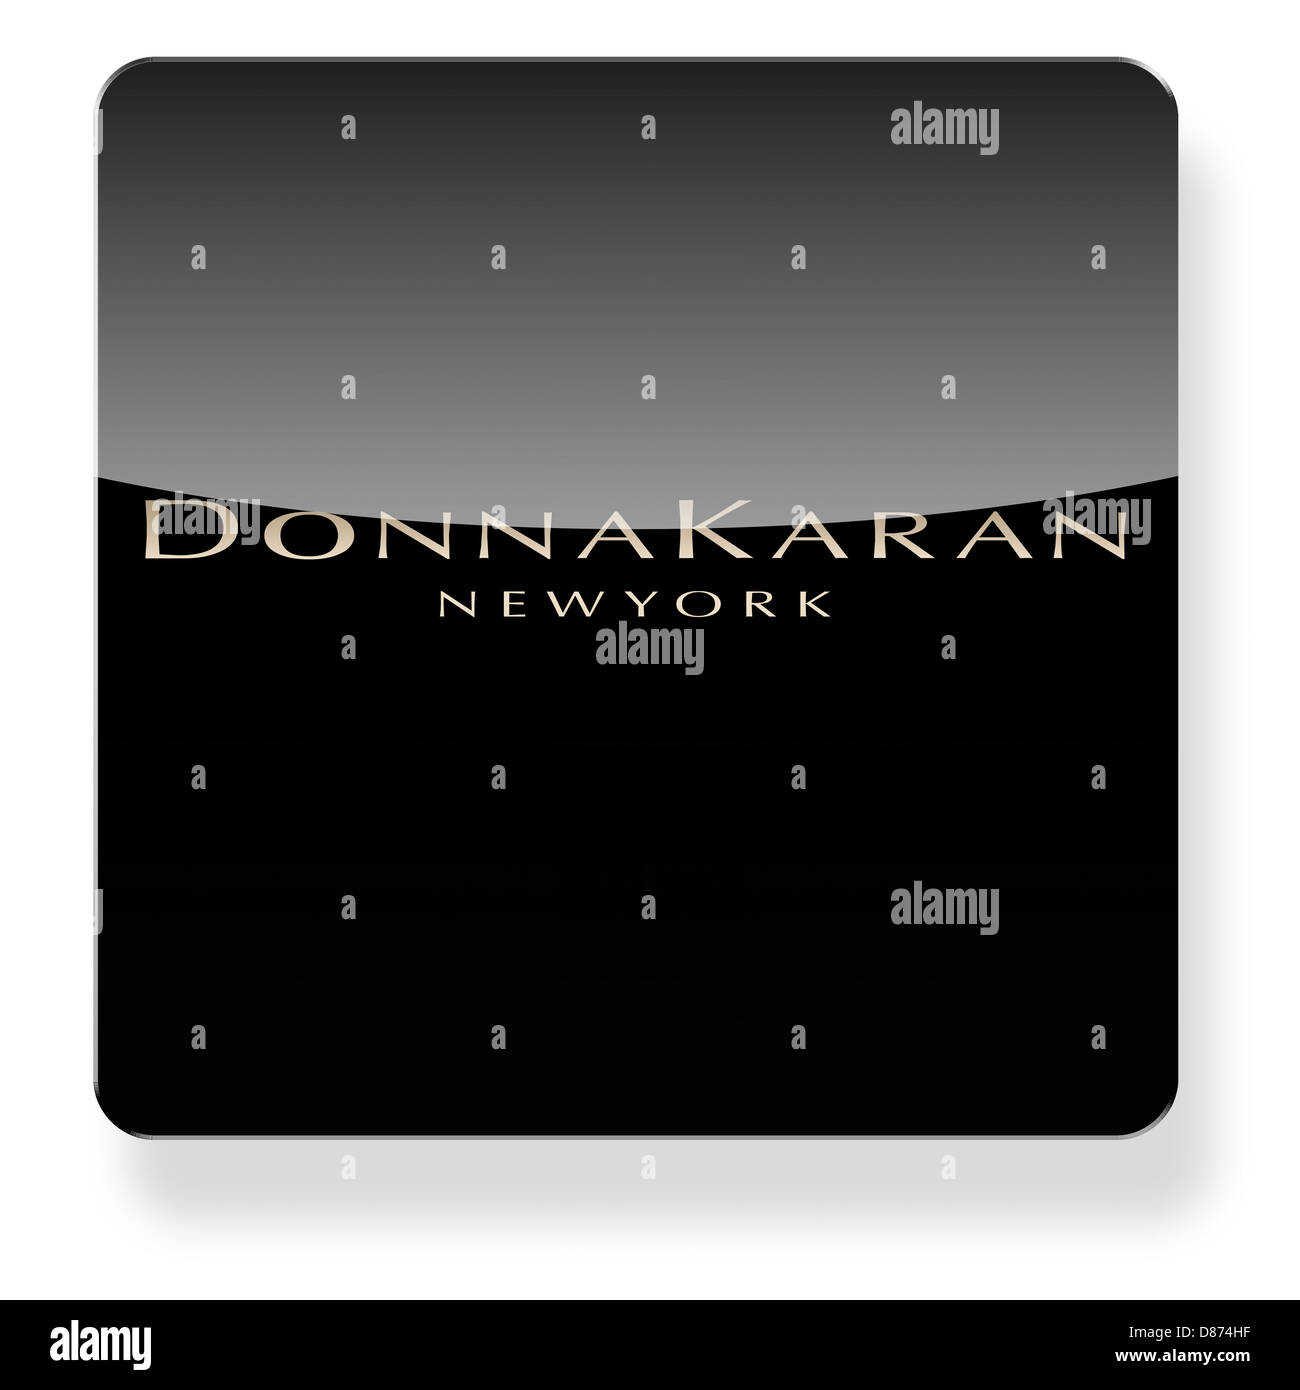 Donna karan logo Cut Out Stock Images & Pictures - Alamy